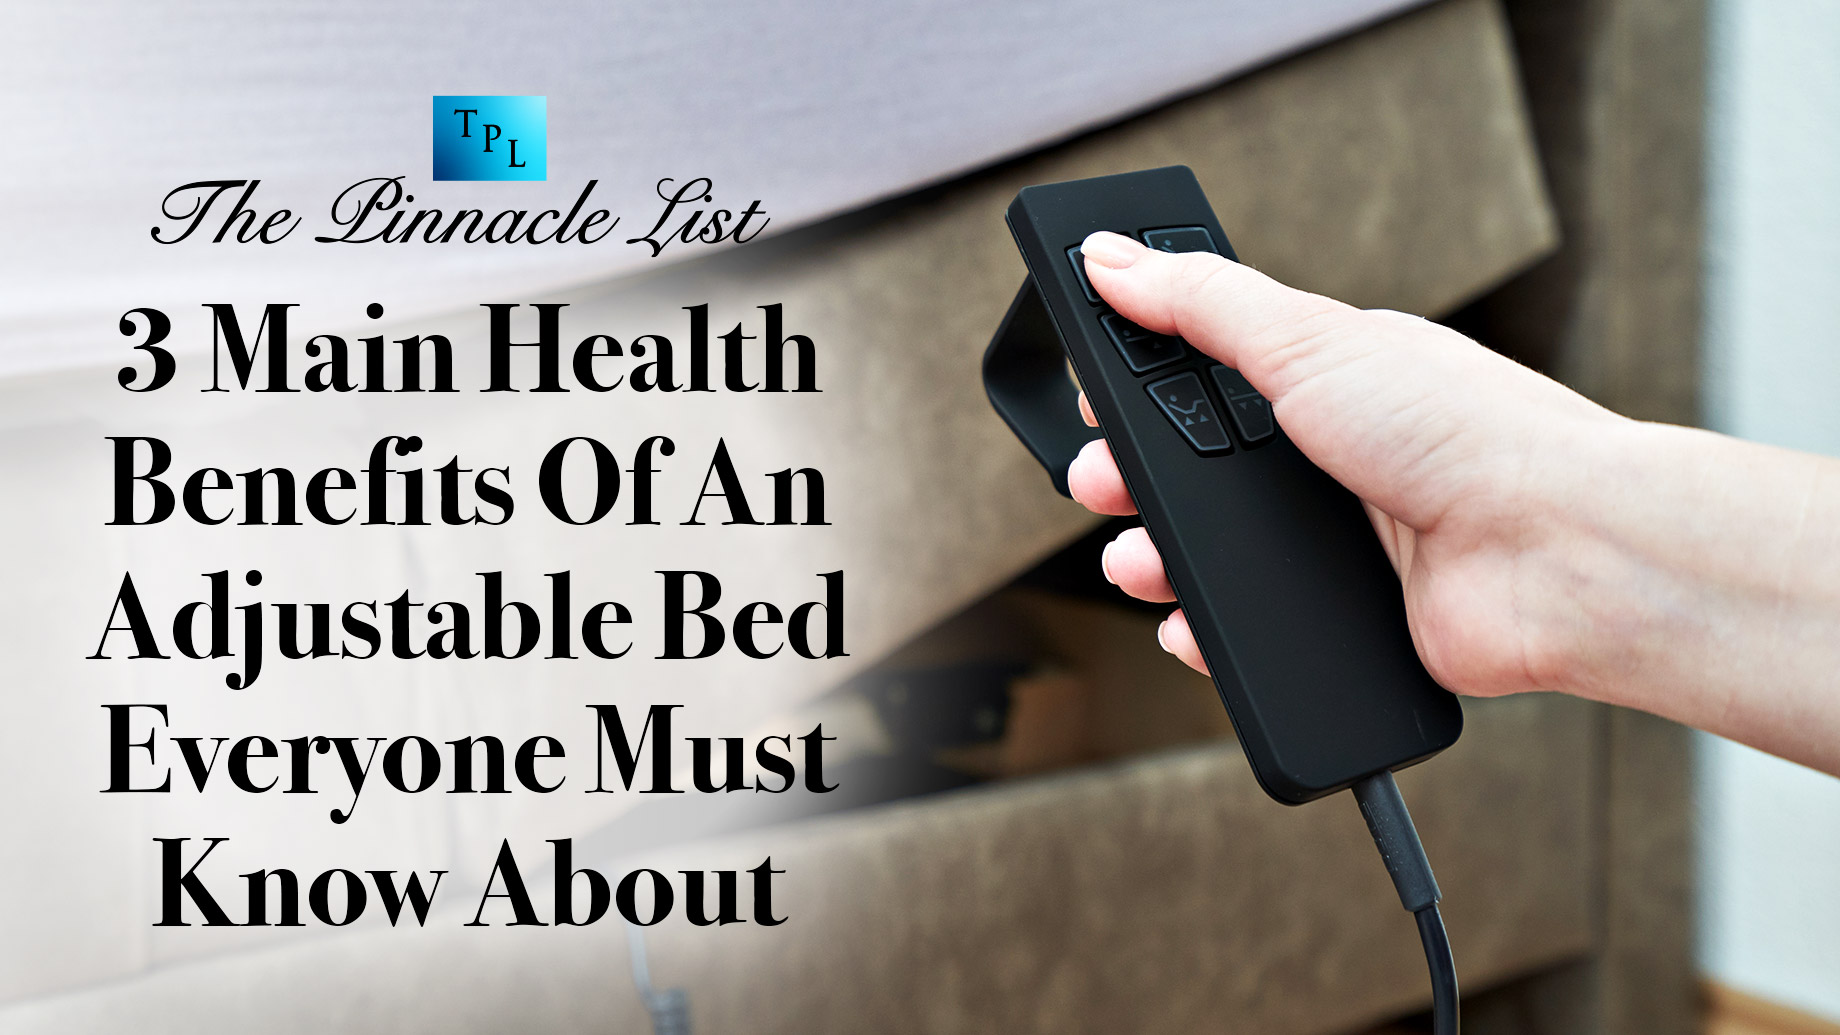 3 Main Health Benefits Of An Adjustable Bed Everyon3 Main Health Benefits Of An Adjustable Bed Everyone Must Know Aboute Must Know About